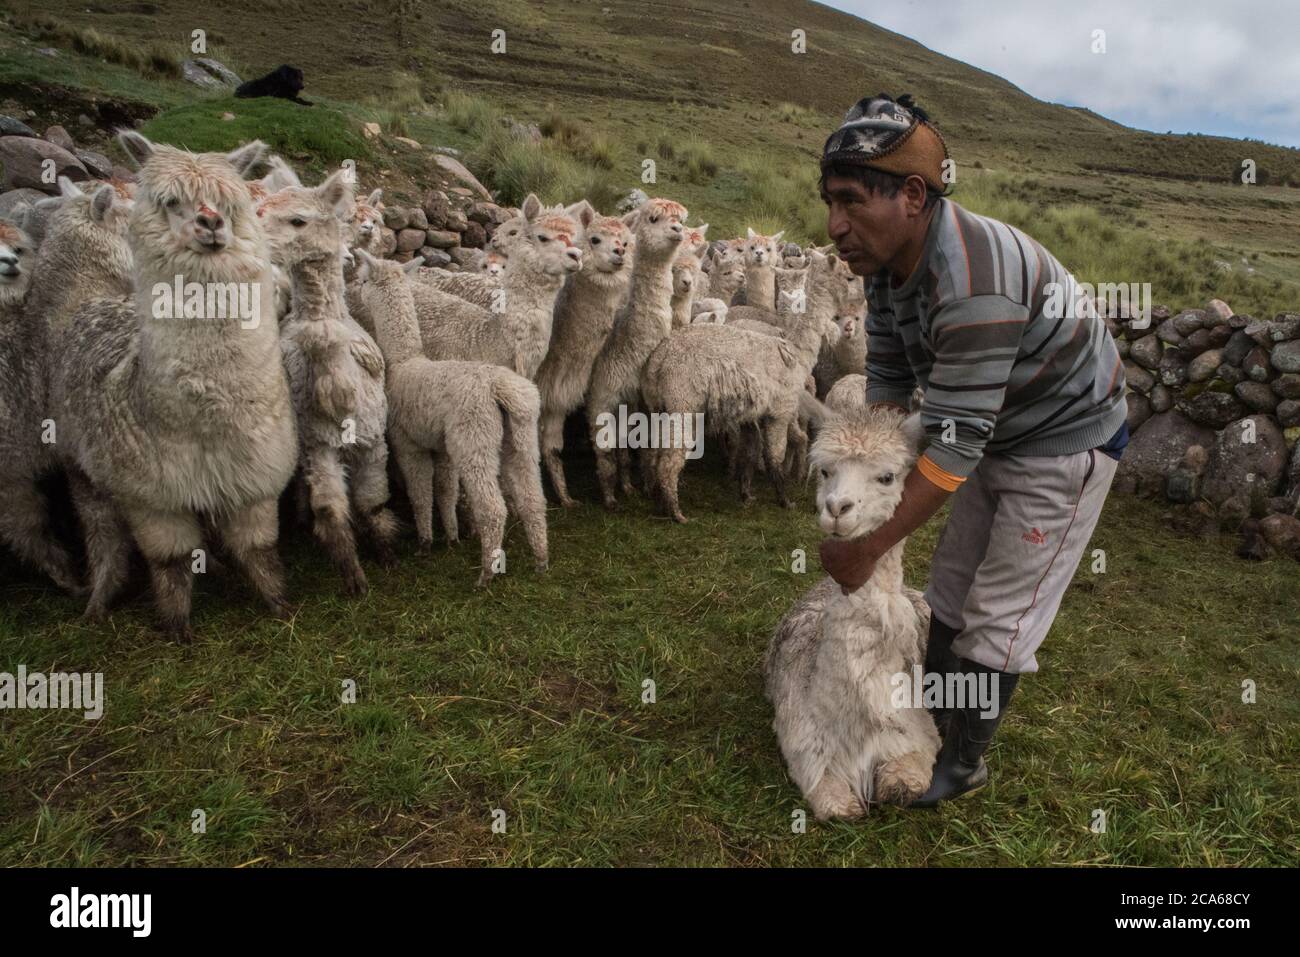 A peruvian man herding alpaca in a Quechua community in the Andes, getting them ready for a health check. Stock Photo